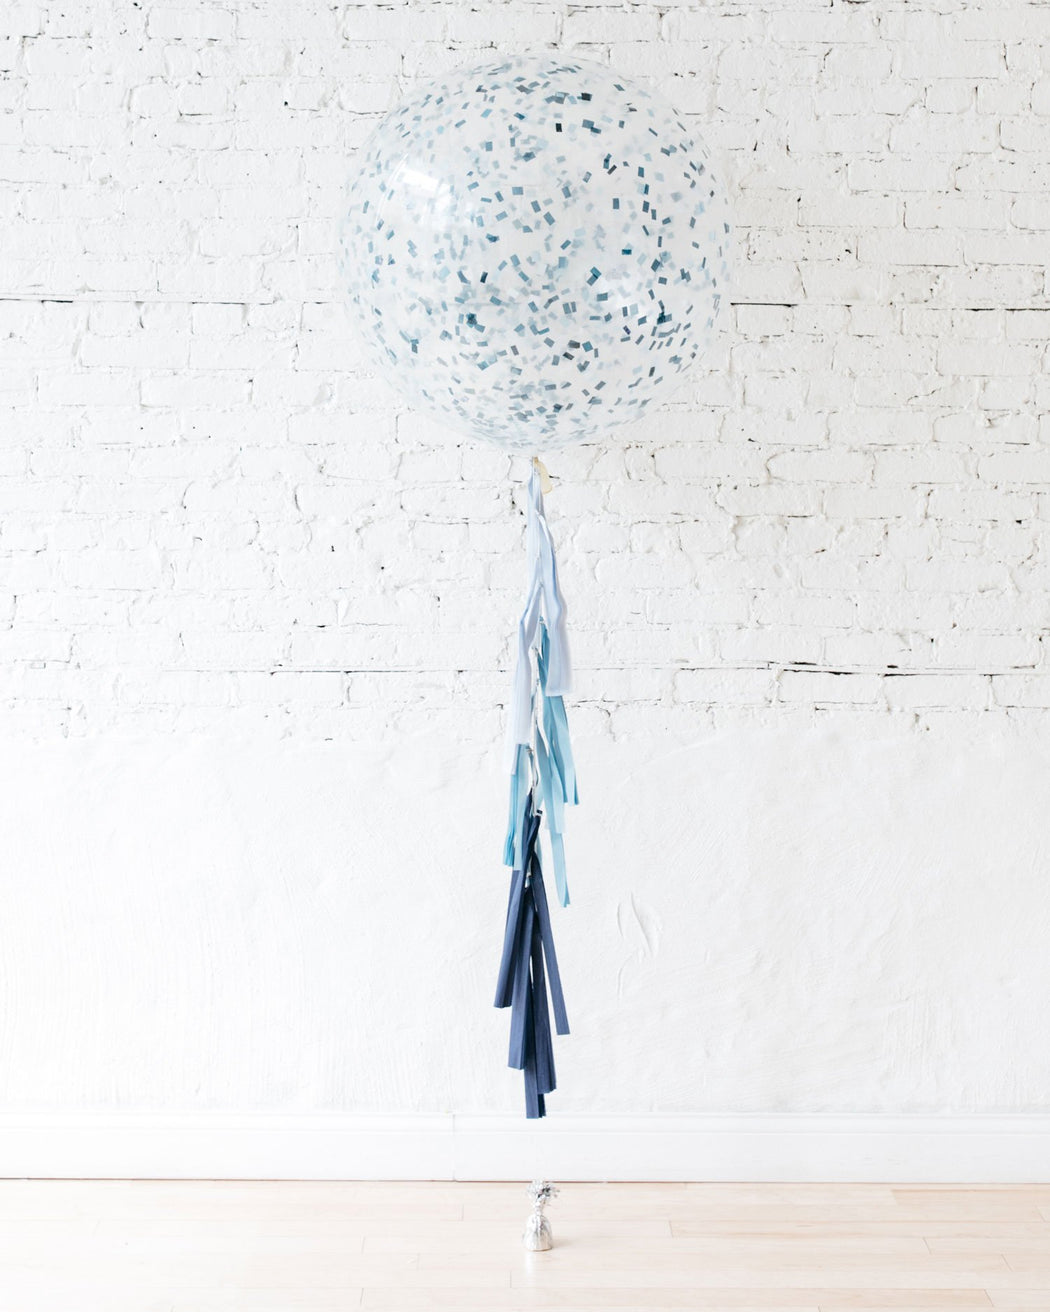 Giant Balloon with Blue Confetti